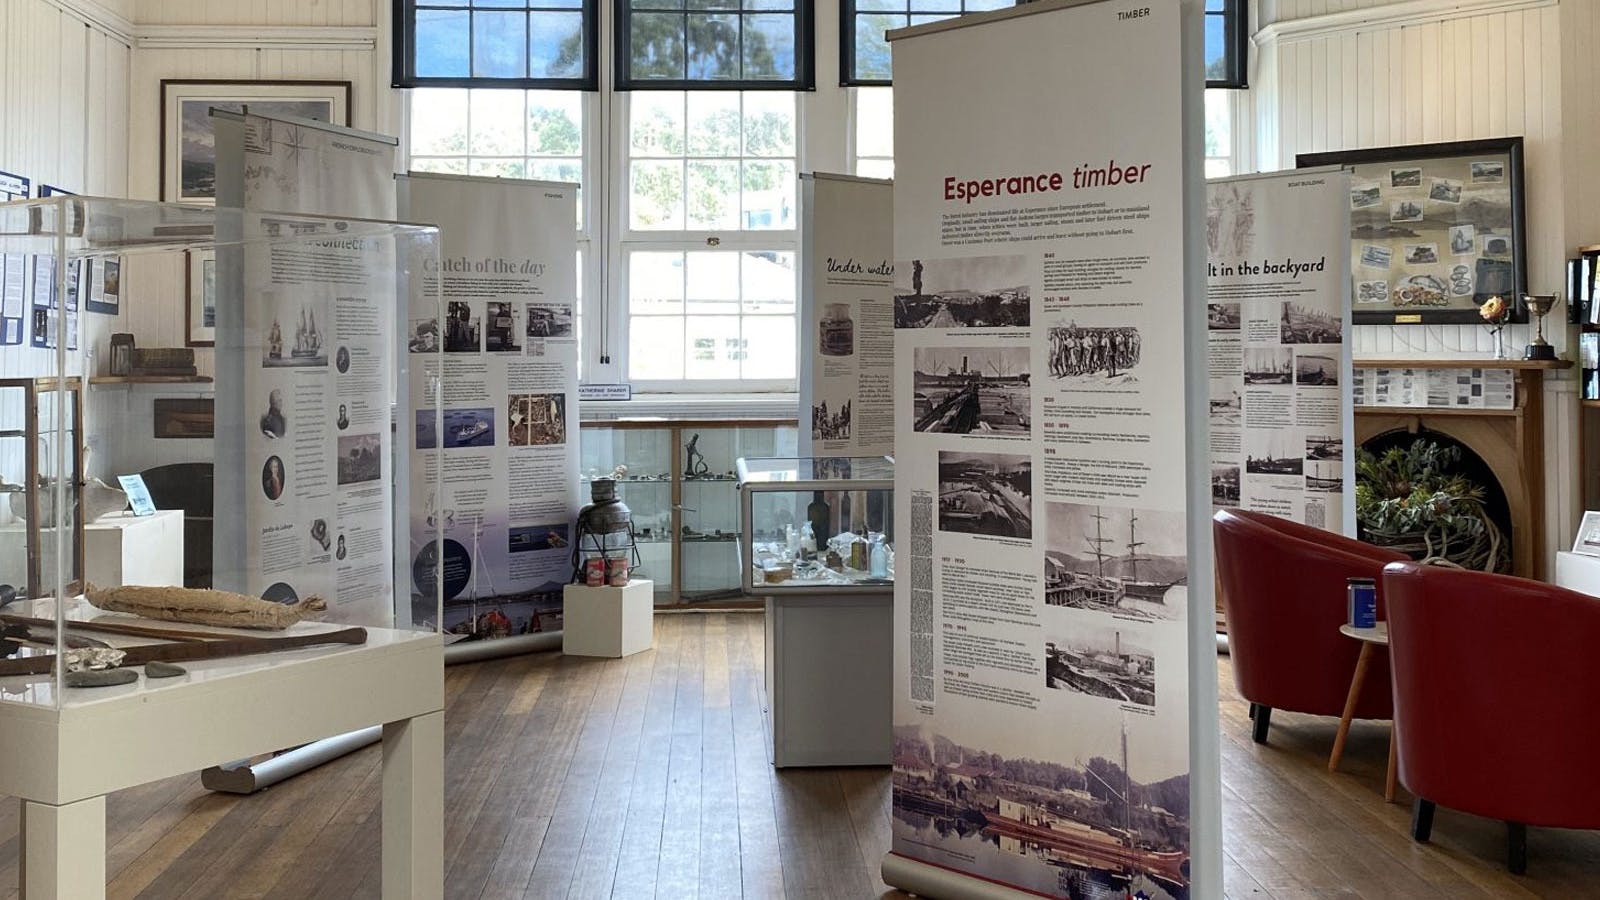 Exhibition on Dover’s maritime history